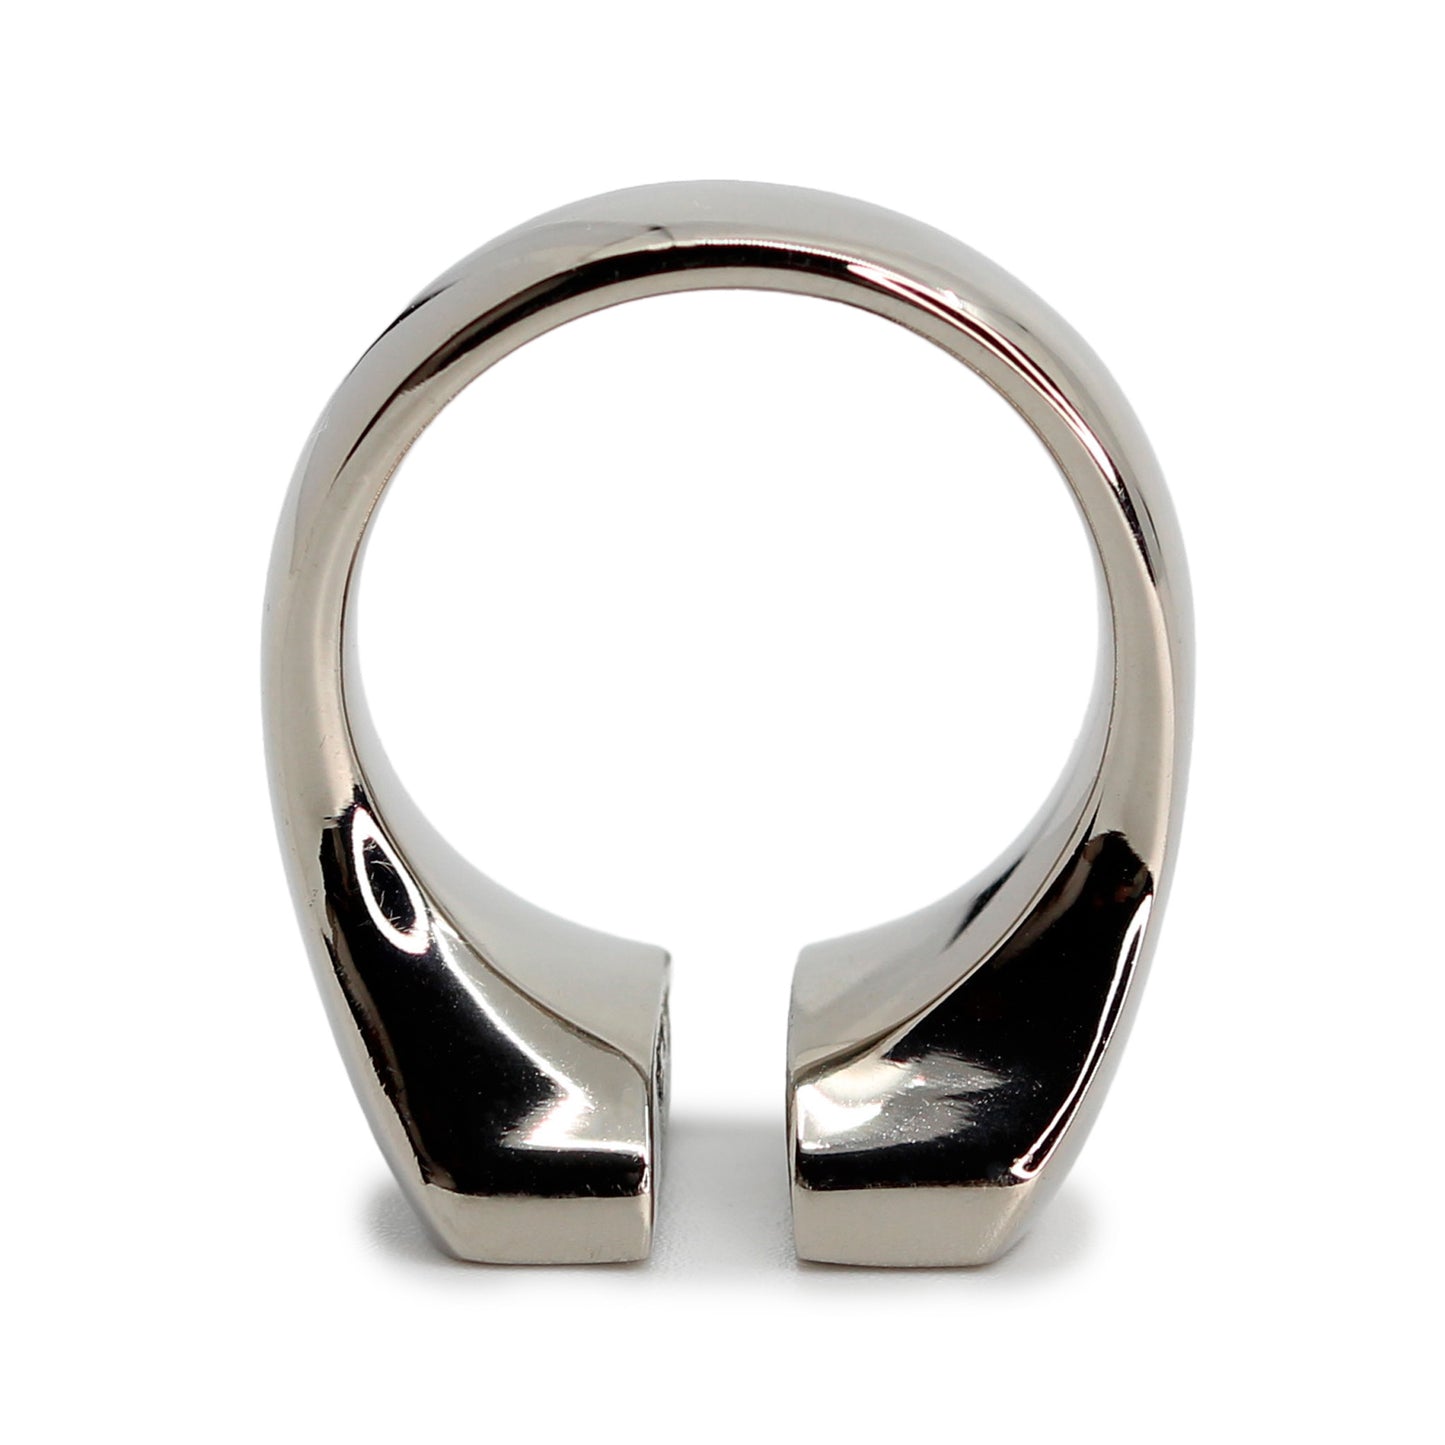 Single silver-colored titanium signet ring, 15x15 mm wide surface which has been cut through the middle. Image shows view of the ring top facing down